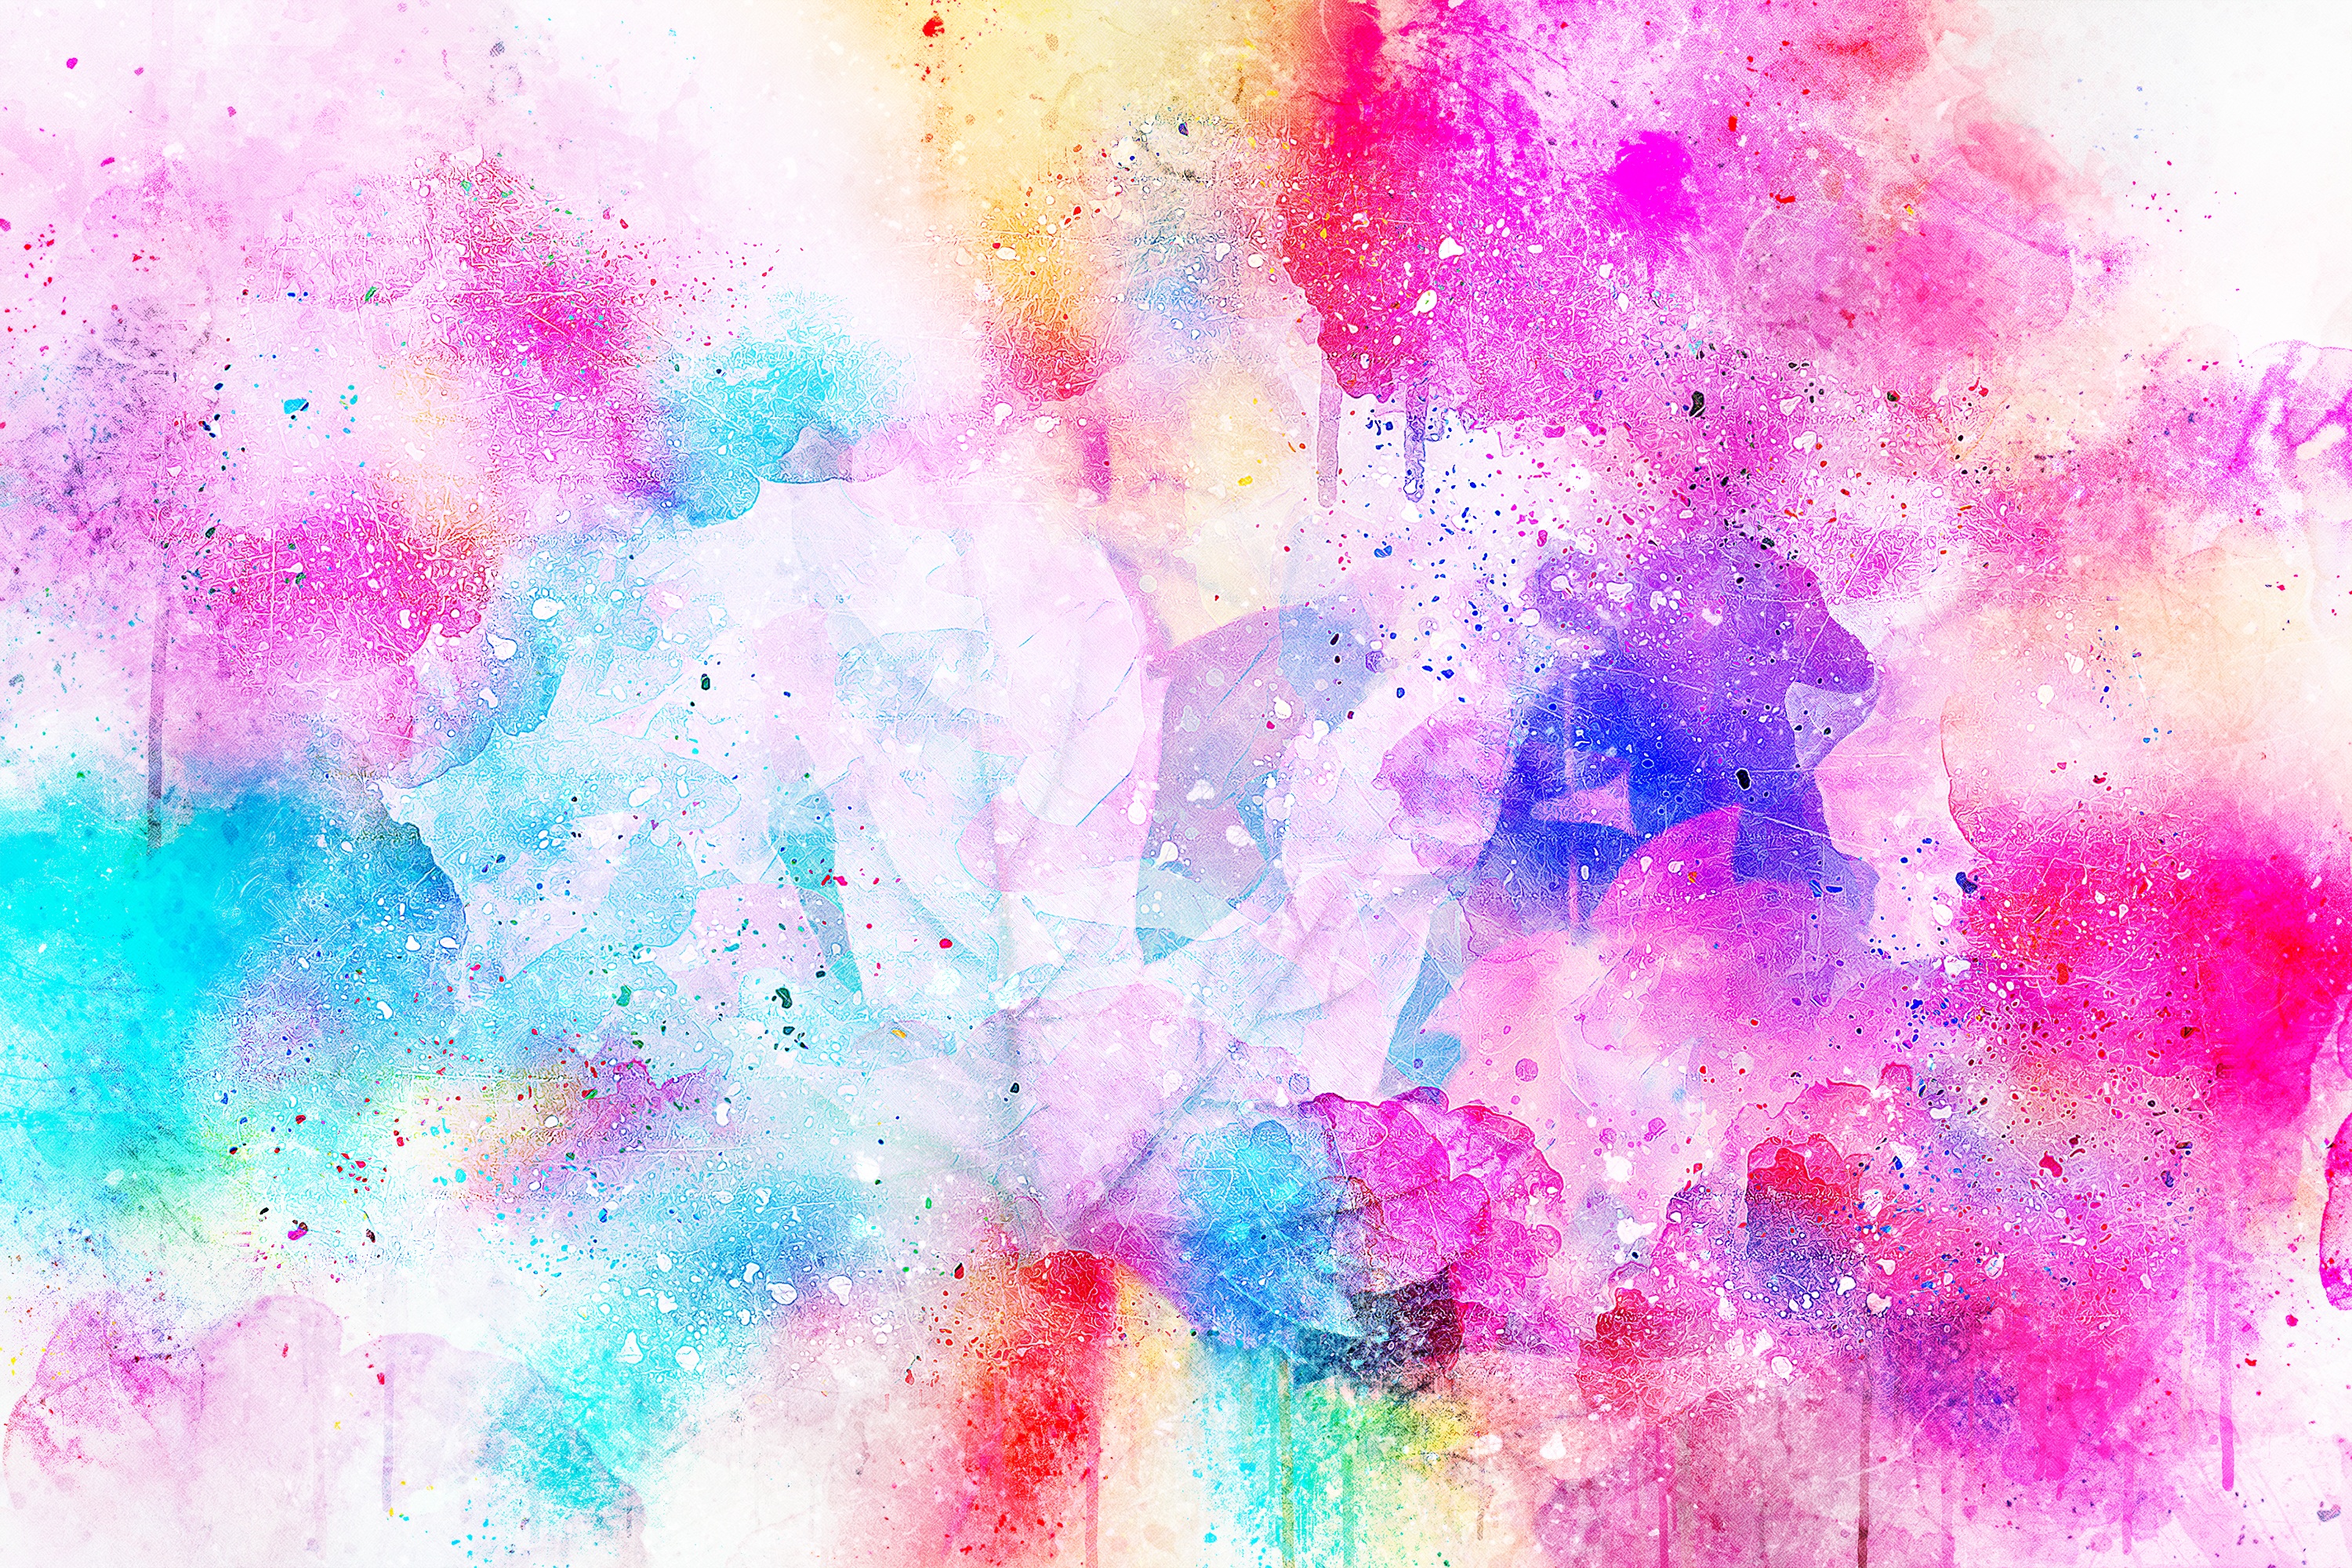 126261 download wallpaper abstract, pink, bright, stains, spots, watercolor screensavers and pictures for free